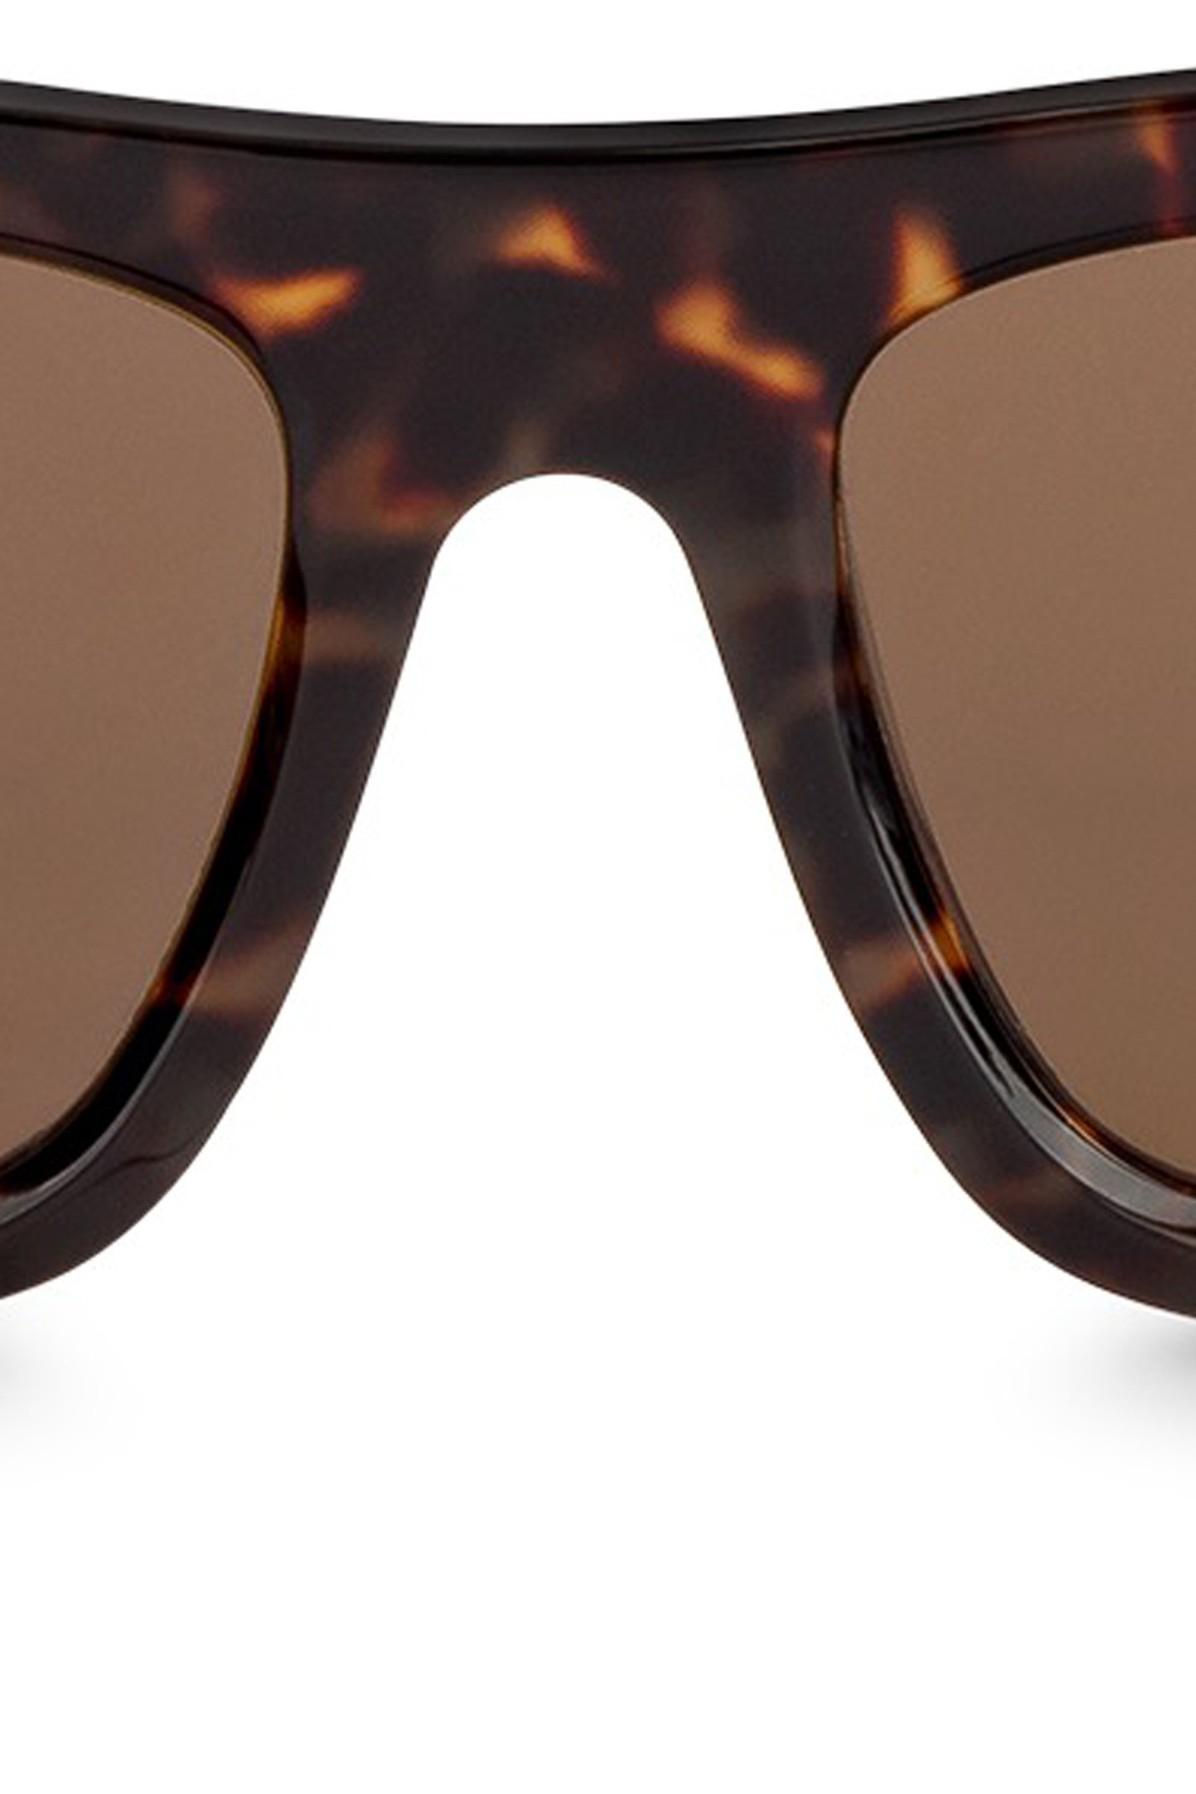 Goggle glasses Louis Vuitton Brown in Metal - 32934830